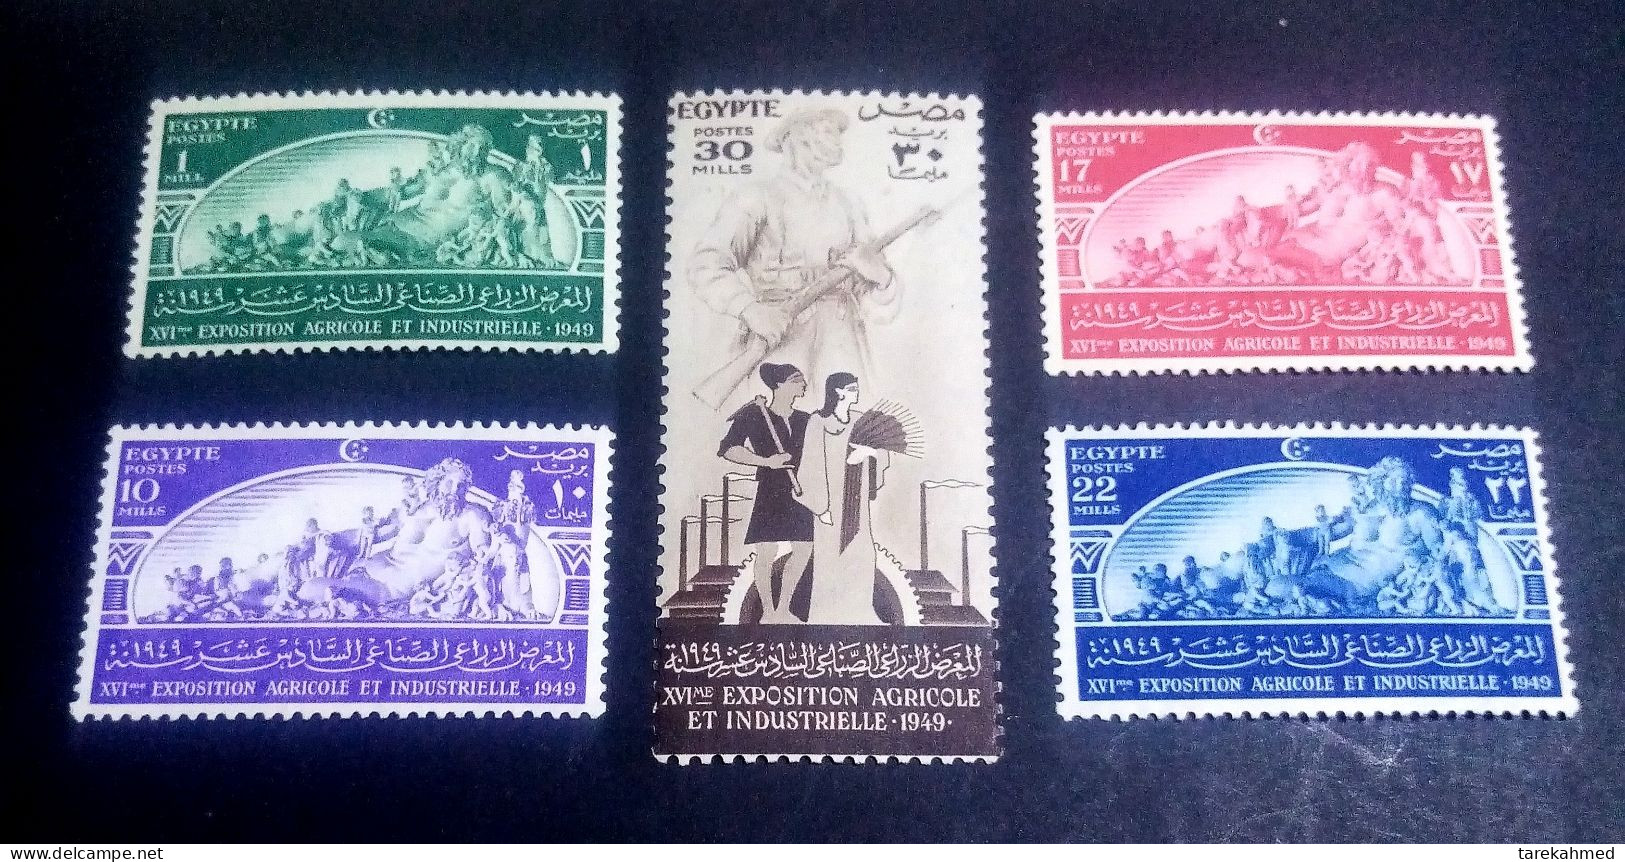 EGYPT KINGDOM 1949 , AGRICULTURE & INDUSTRY EXPOSITION S.G. 352-356 . Super MNH - Nuovi